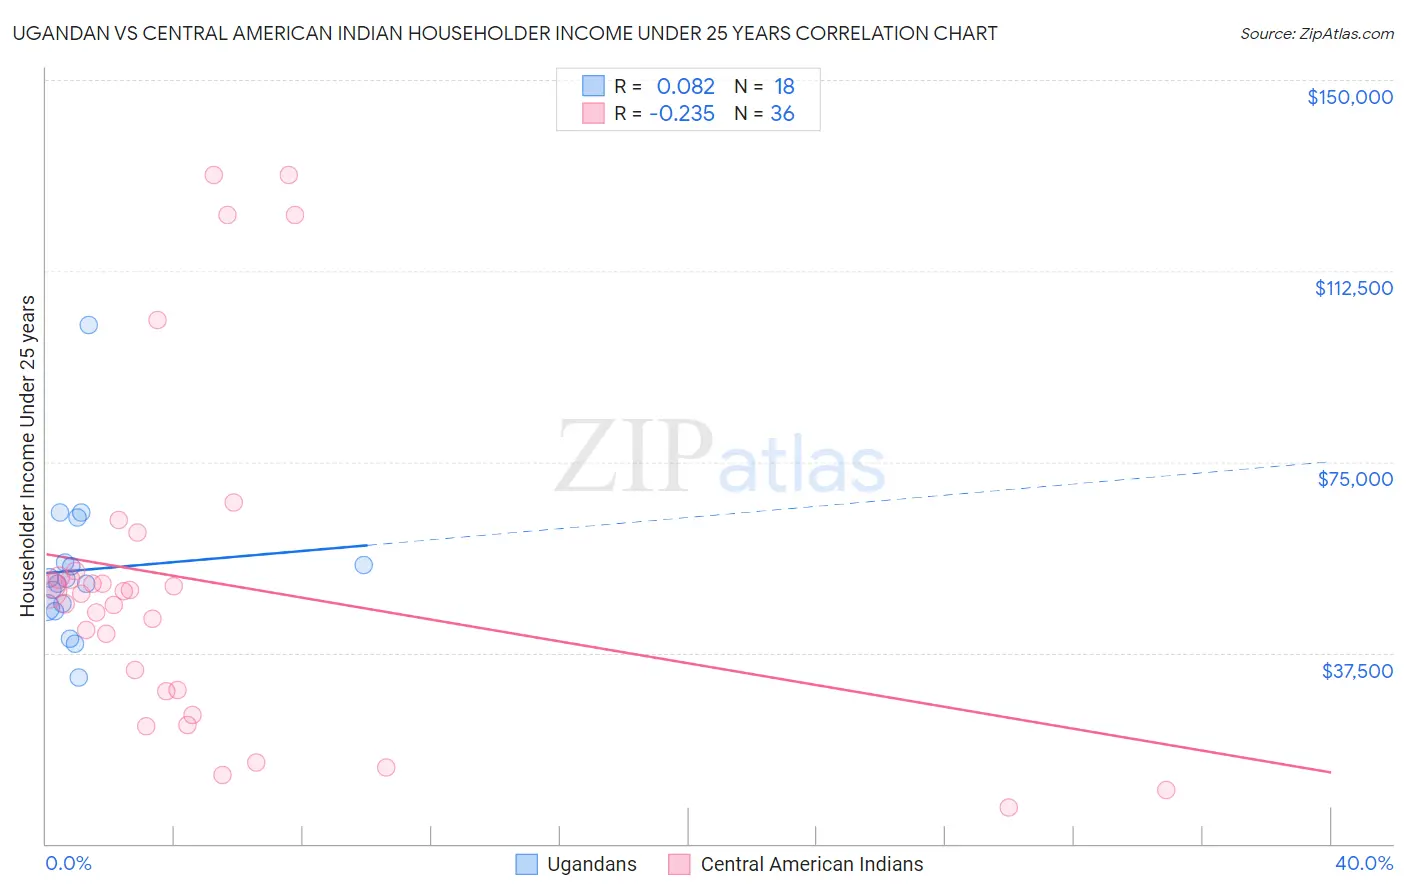 Ugandan vs Central American Indian Householder Income Under 25 years